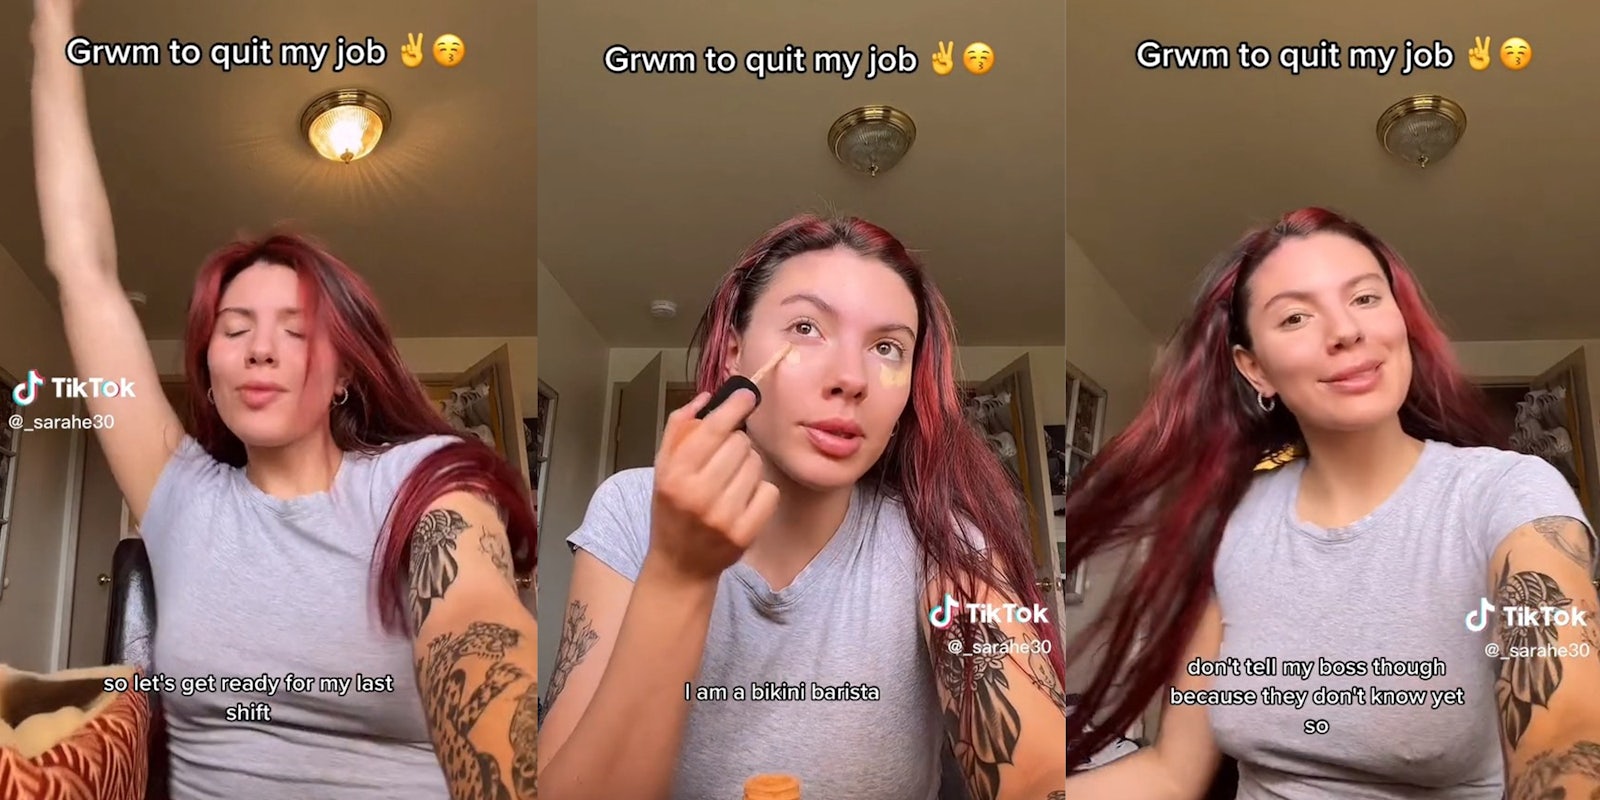 Bikini barista slams job after being forced to wear makeup, dealing with rude male customers